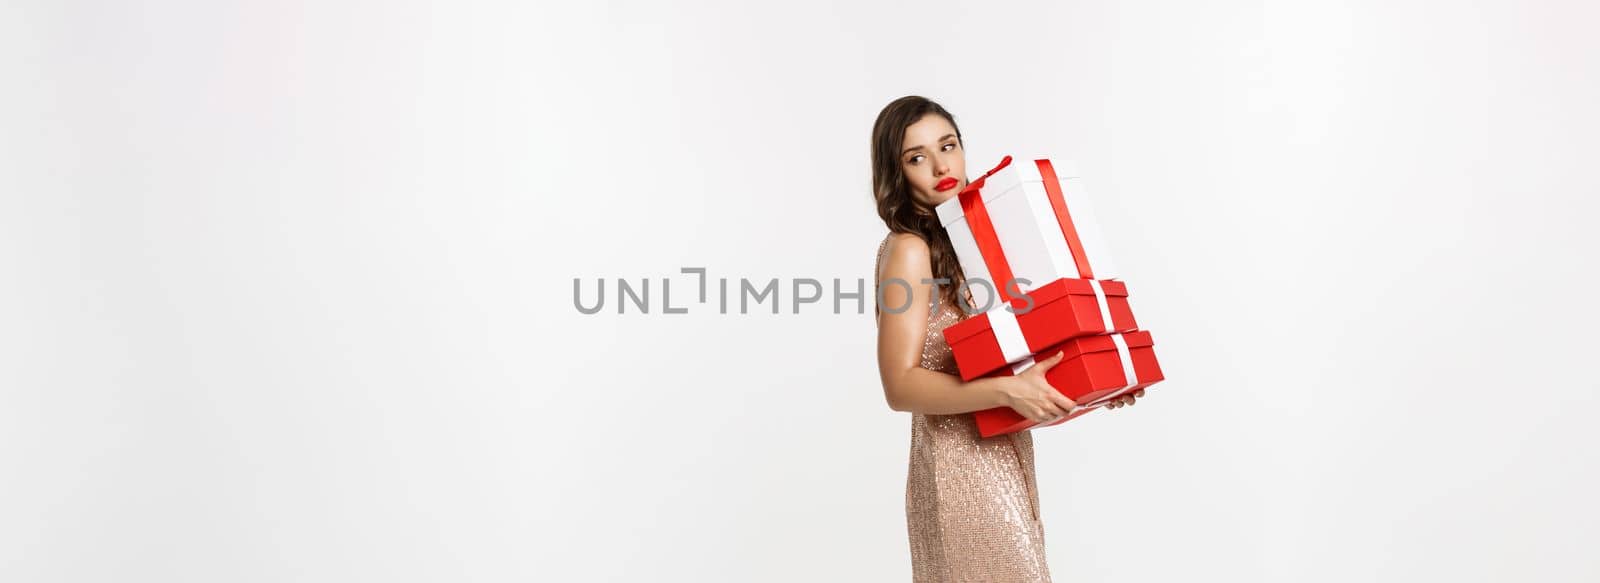 Party and celebration concept. Full-length of attractive glamour woman in elegant dress, holding Christmas gifts and looking tired, white background.